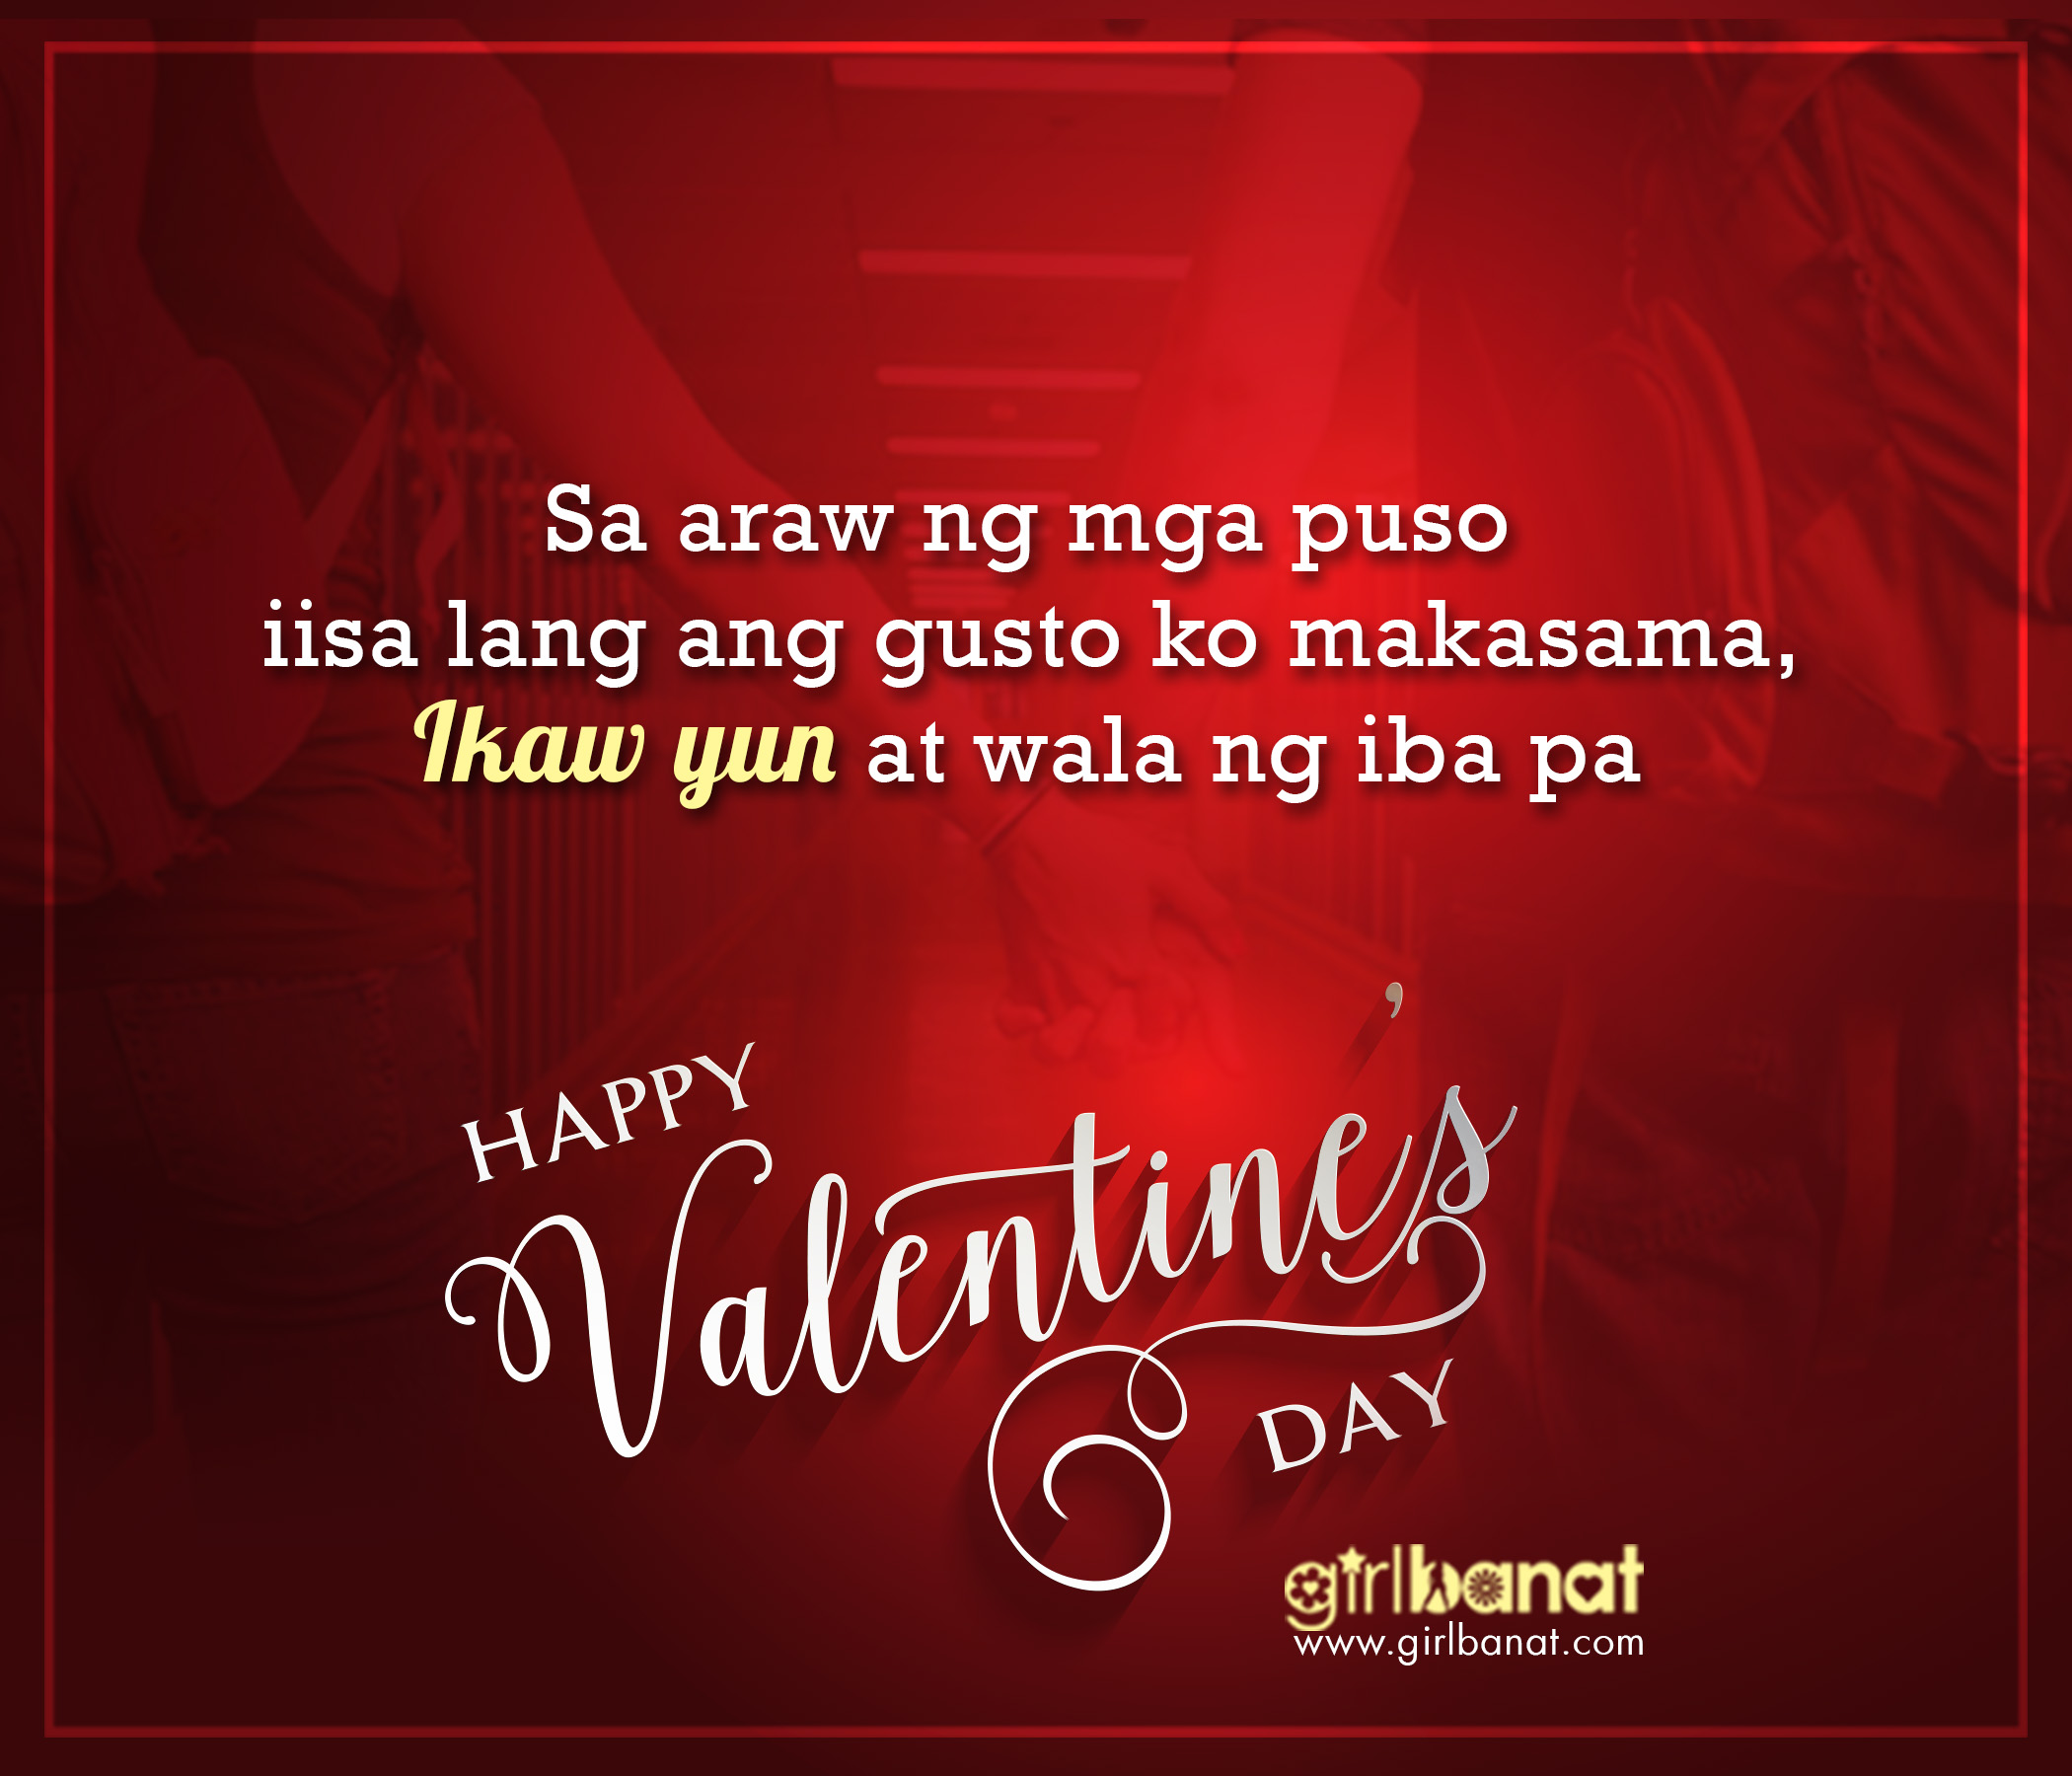 Tagalog Valentines Day Quotes That Will Touch Your Heart